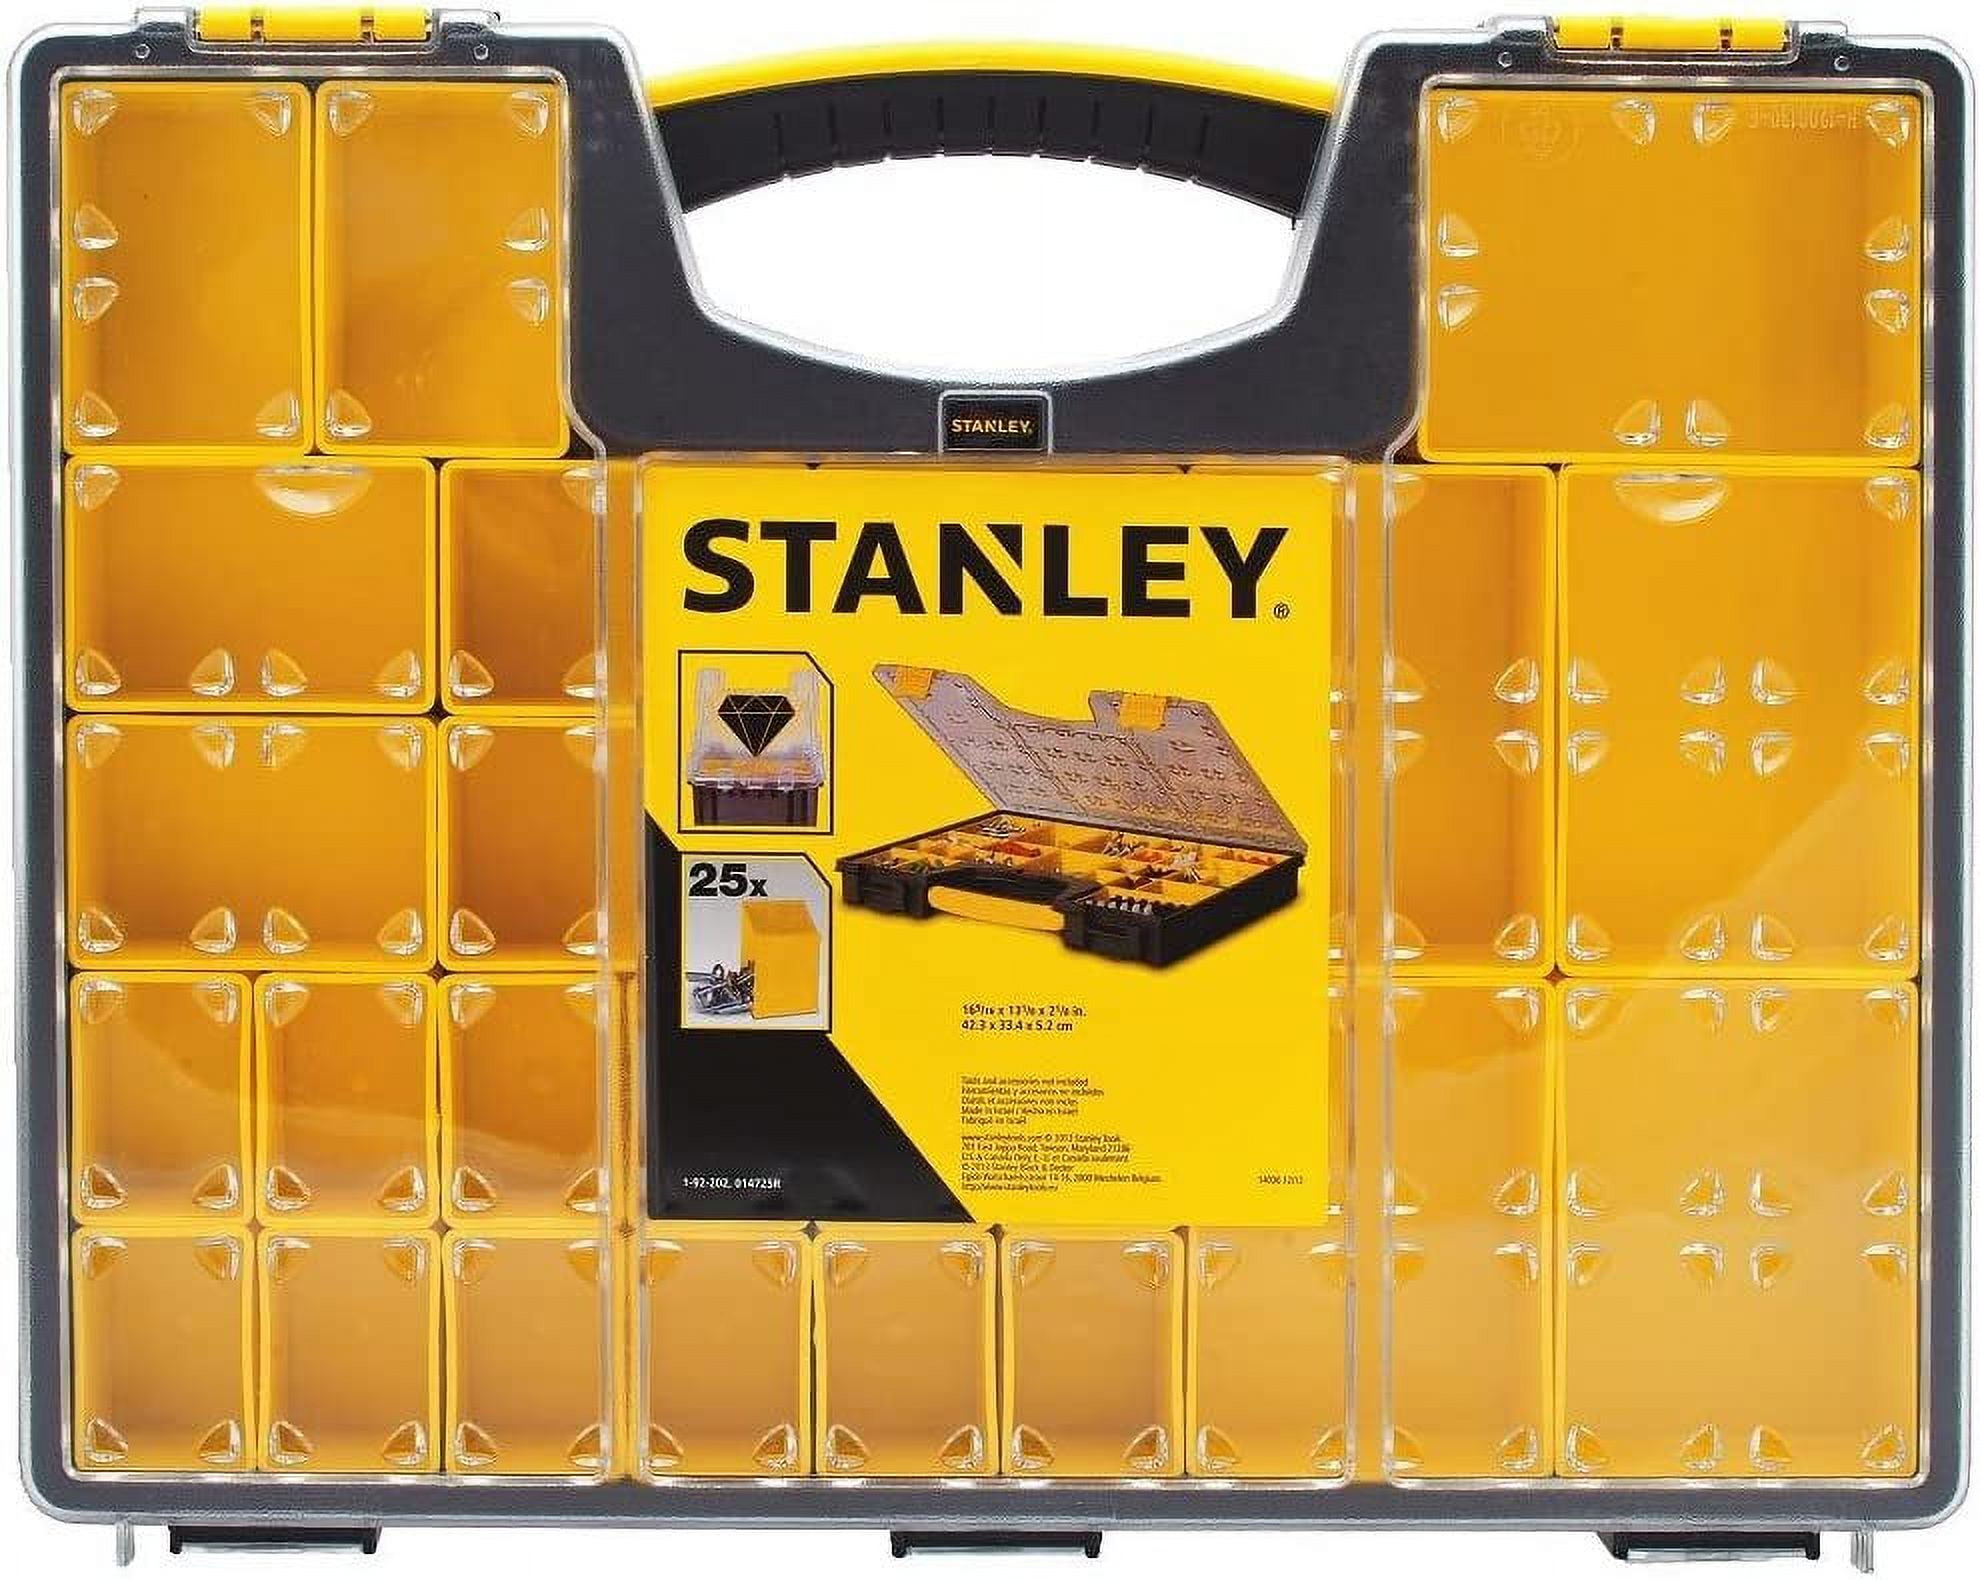 STANLEY Organizer Box With Dividers, Removable Compartment, 25 Compartment  014725R 